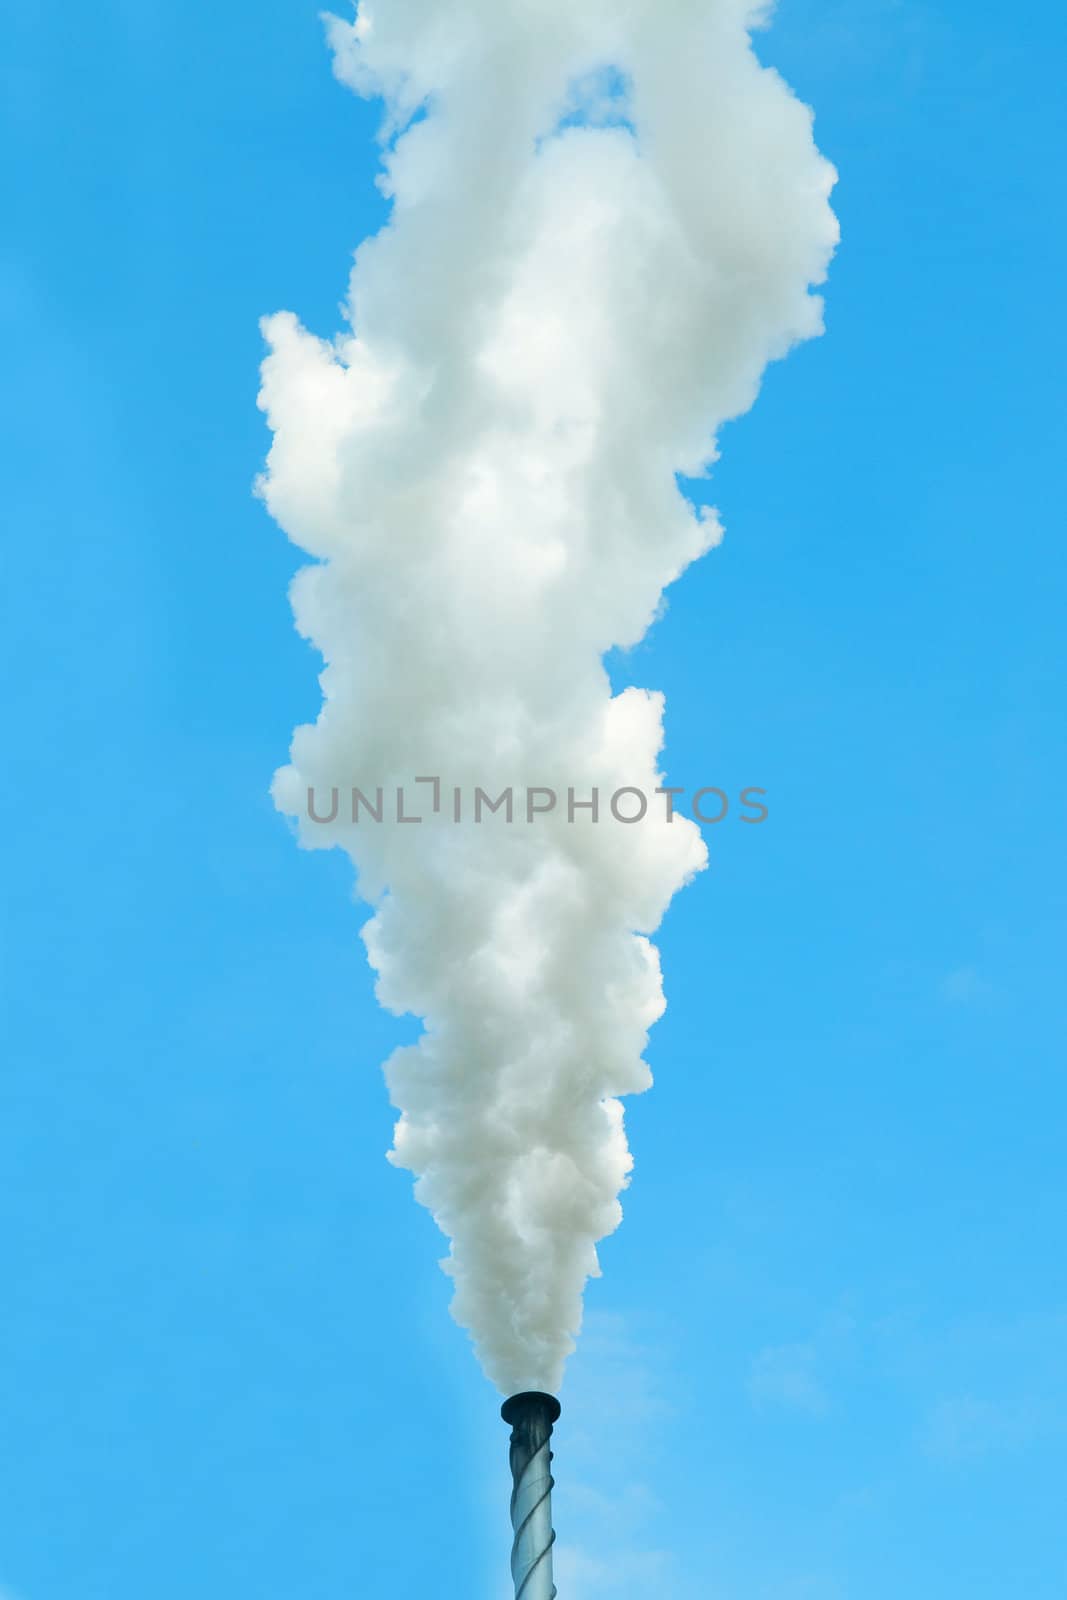 An industrial view on the blue sky background